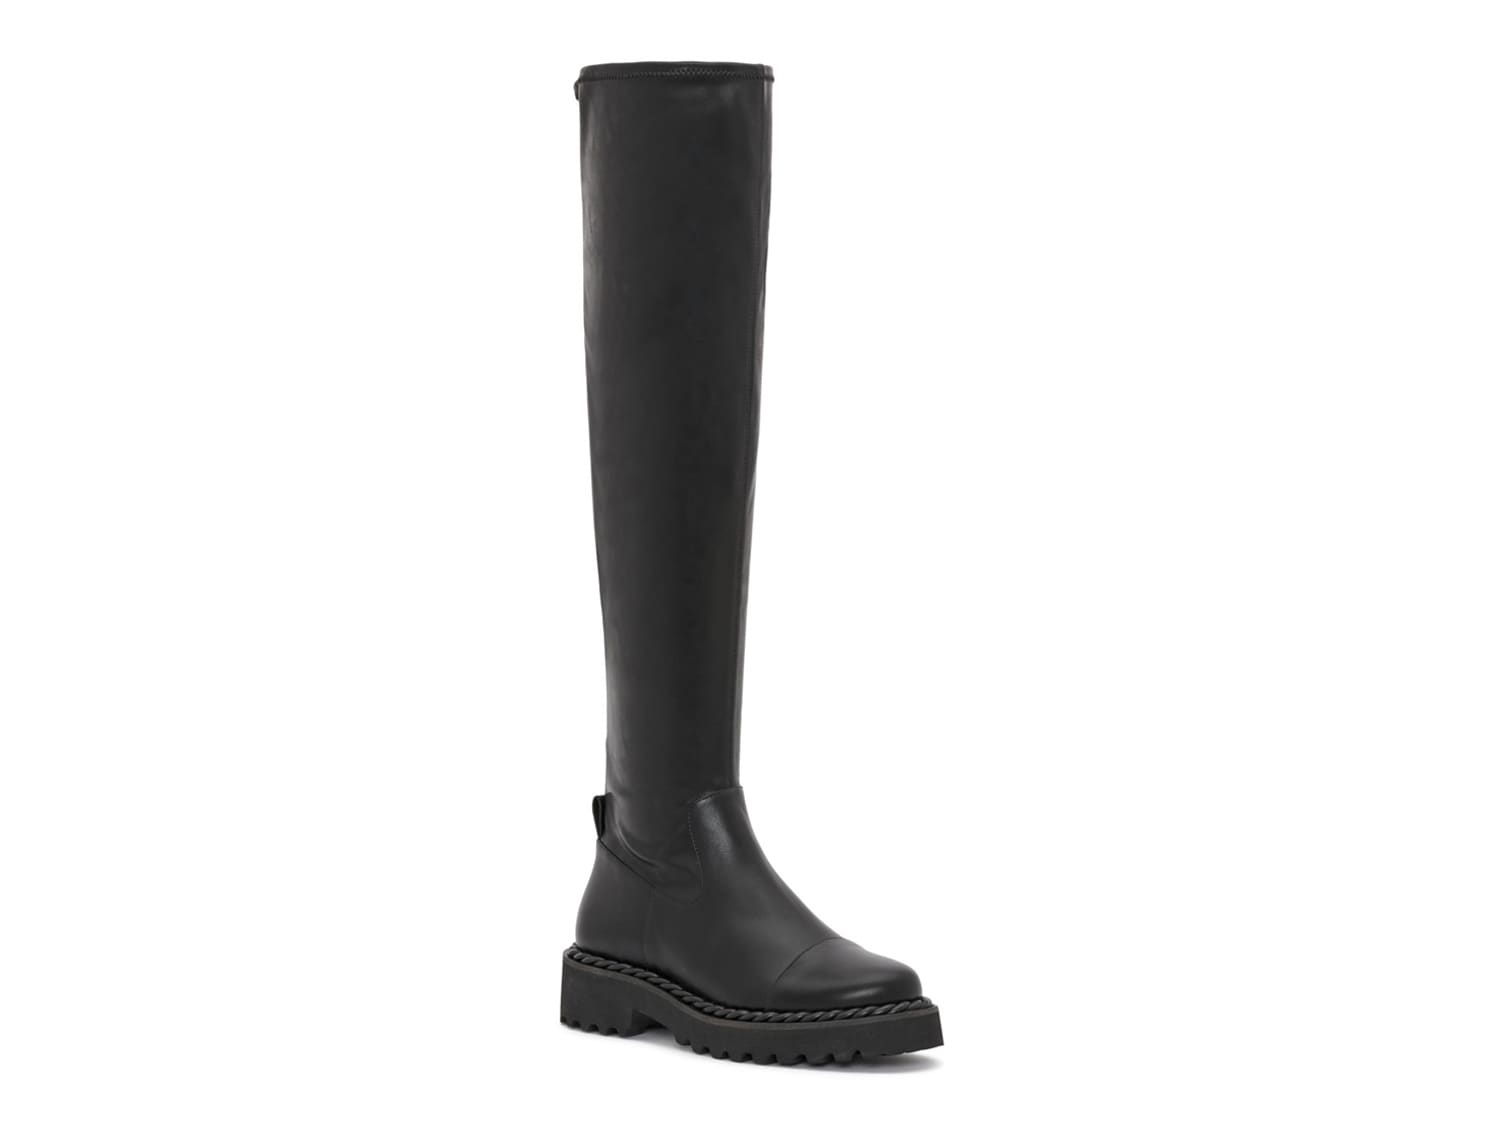 Vince Camuto Melleya Over-the-Knee Boot - Free Shipping | DSW